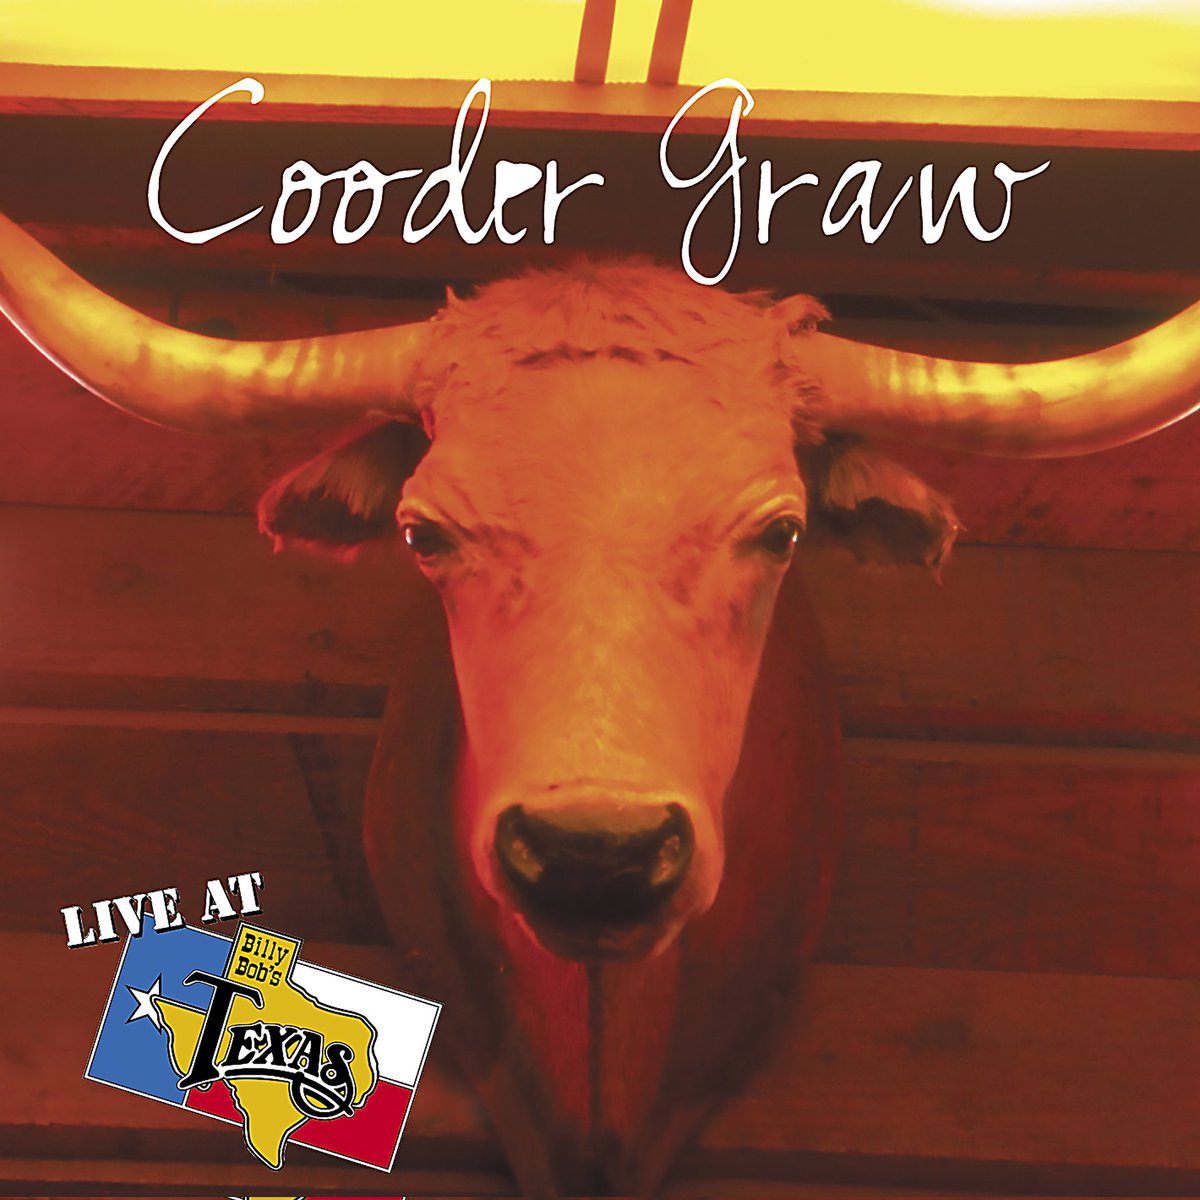 Comin' up at 6 o'clock this afternoon I'll play Amarillo's own Cooder Graw! @CooderGraw Live At @BillyBobsTexas in its entirety and commercial free on 95.7 KPUR. Celebrating the 25th anniversary of its release.